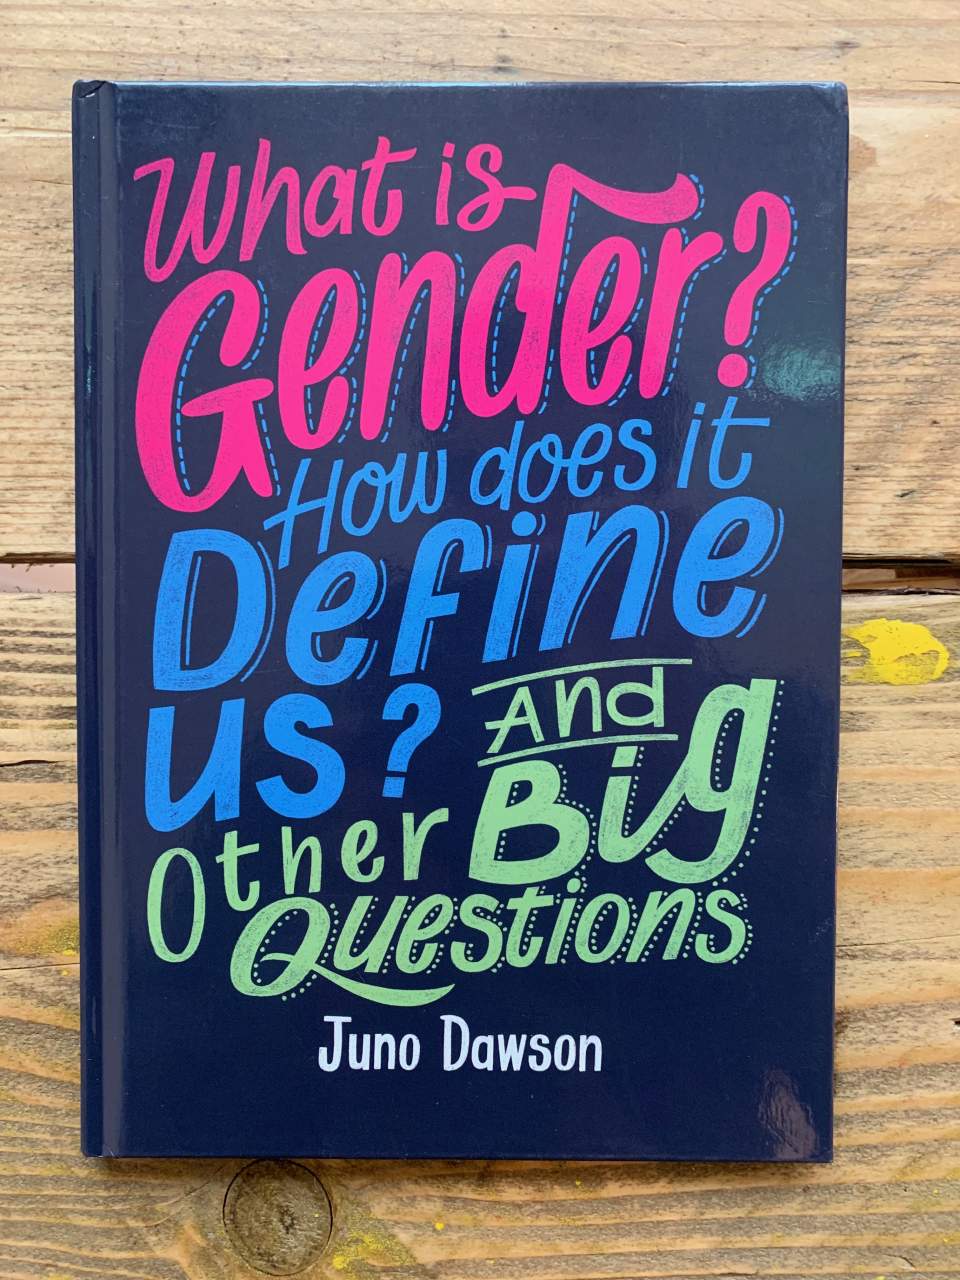 What is Gender? How Does It Define Us? And Other Big Questions for Kids